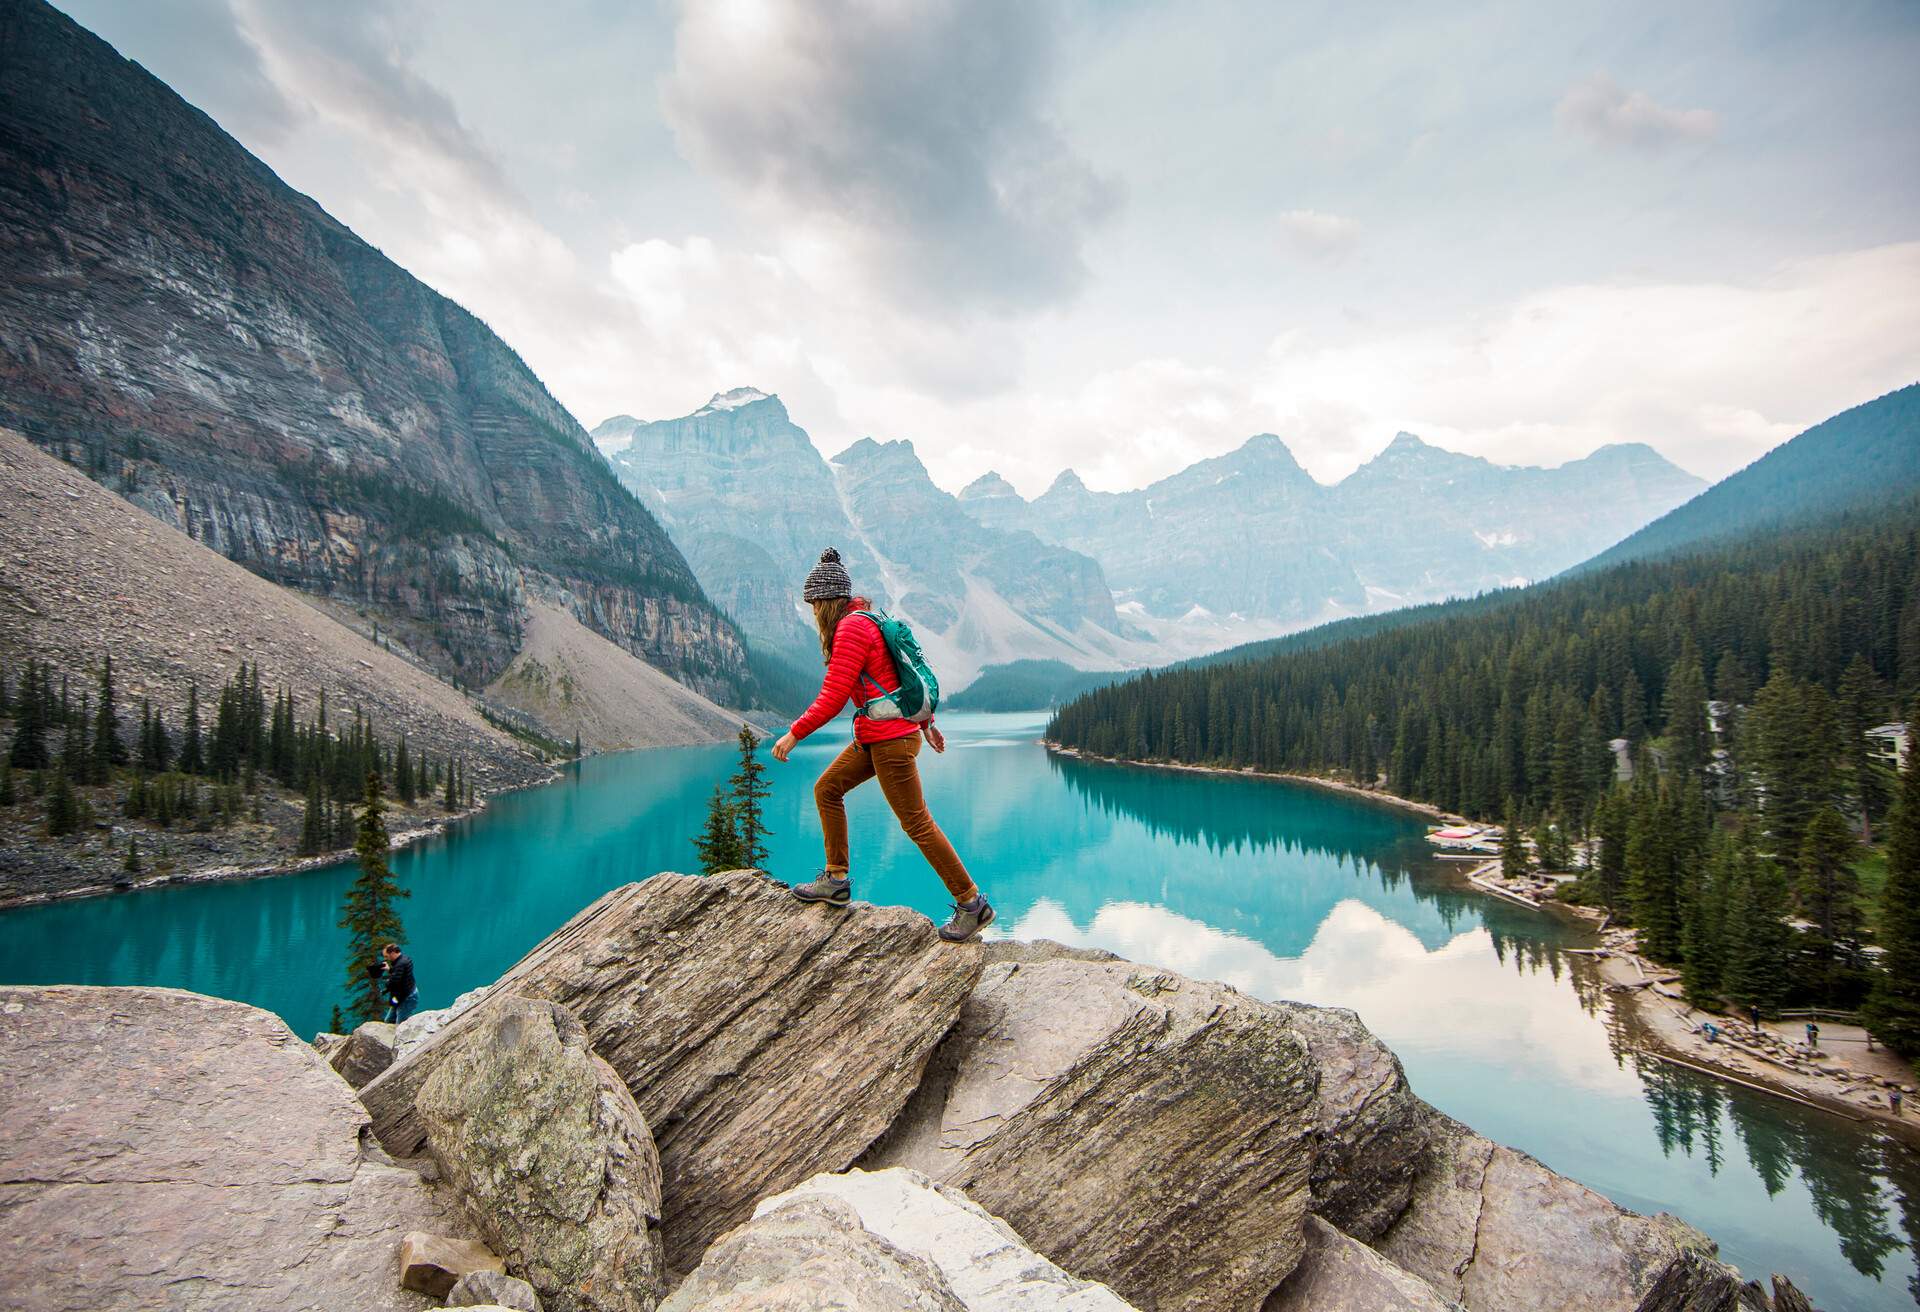 DEST_CANADA_BANFF_LAKE_MORAINE_WOMAN_HIKING_GettyImages-1278823518